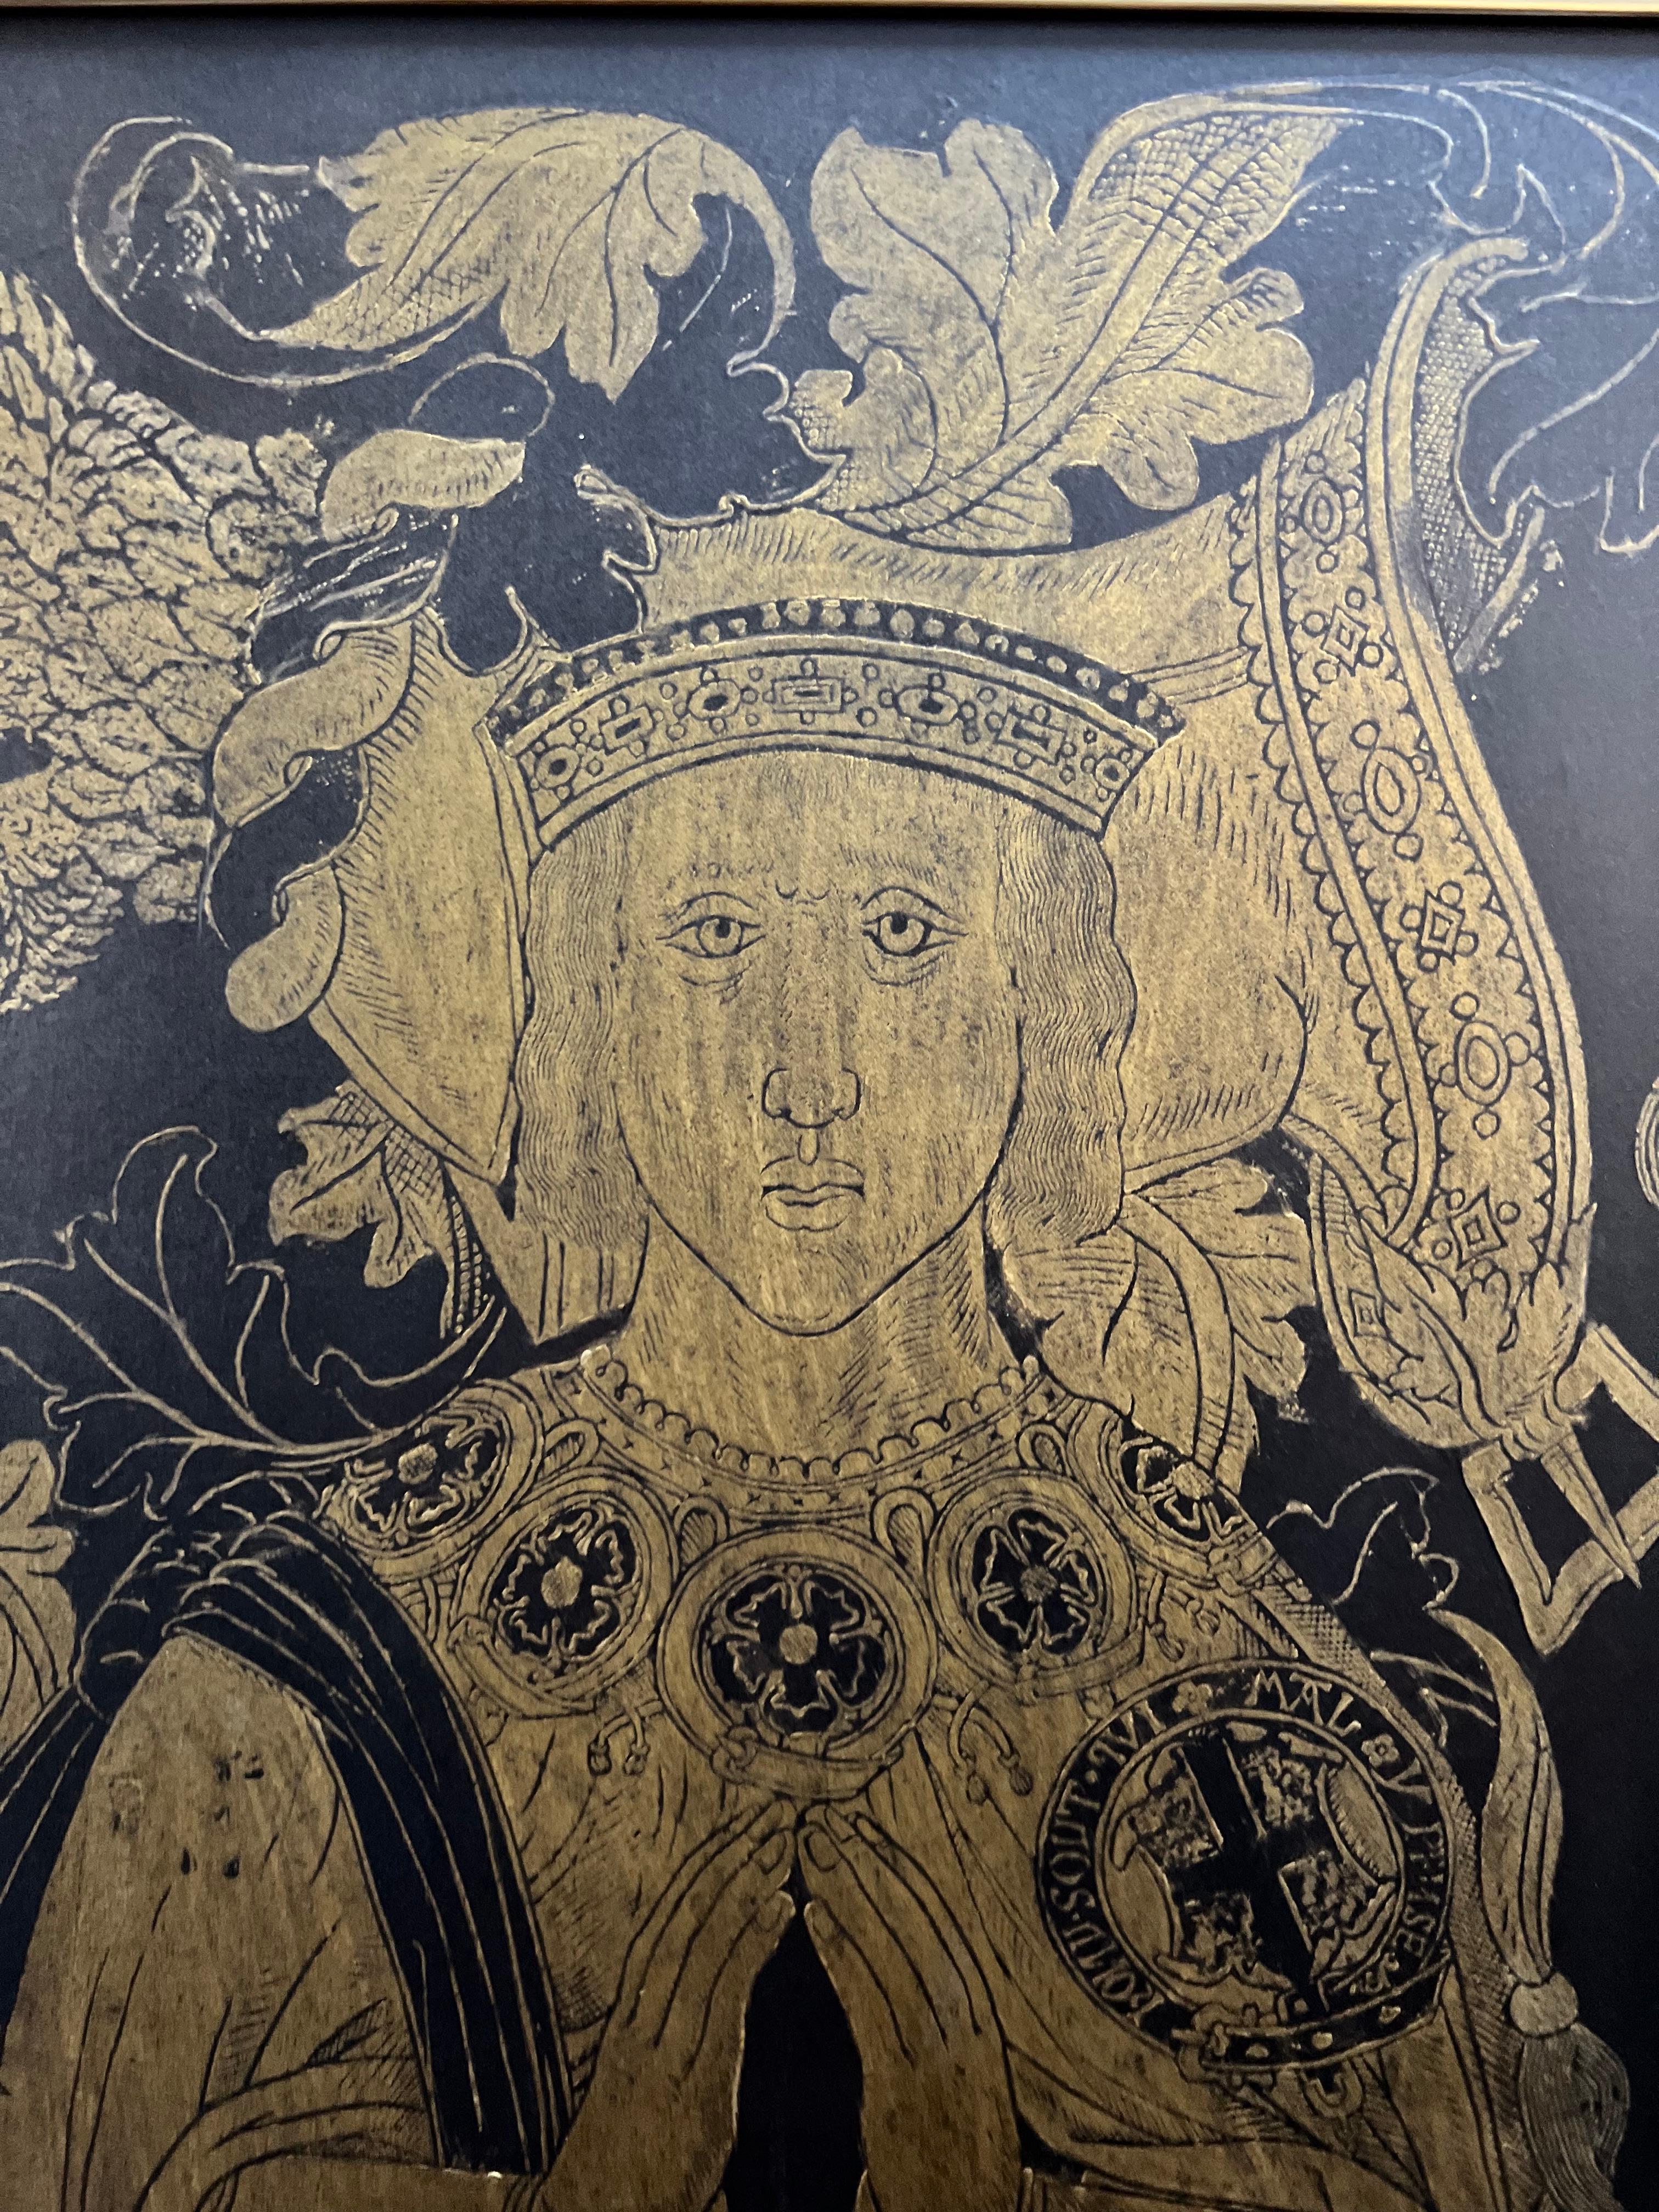 Stunning large rubbing of Sir Thomas measures approximately 30 by 69 inches. He has been made with gold heelball on black paper produced specifically for brass rubbing.
Sir Thomas Boleyn's brass is located in Hever, Kent, Great Britain. Sir Thomas